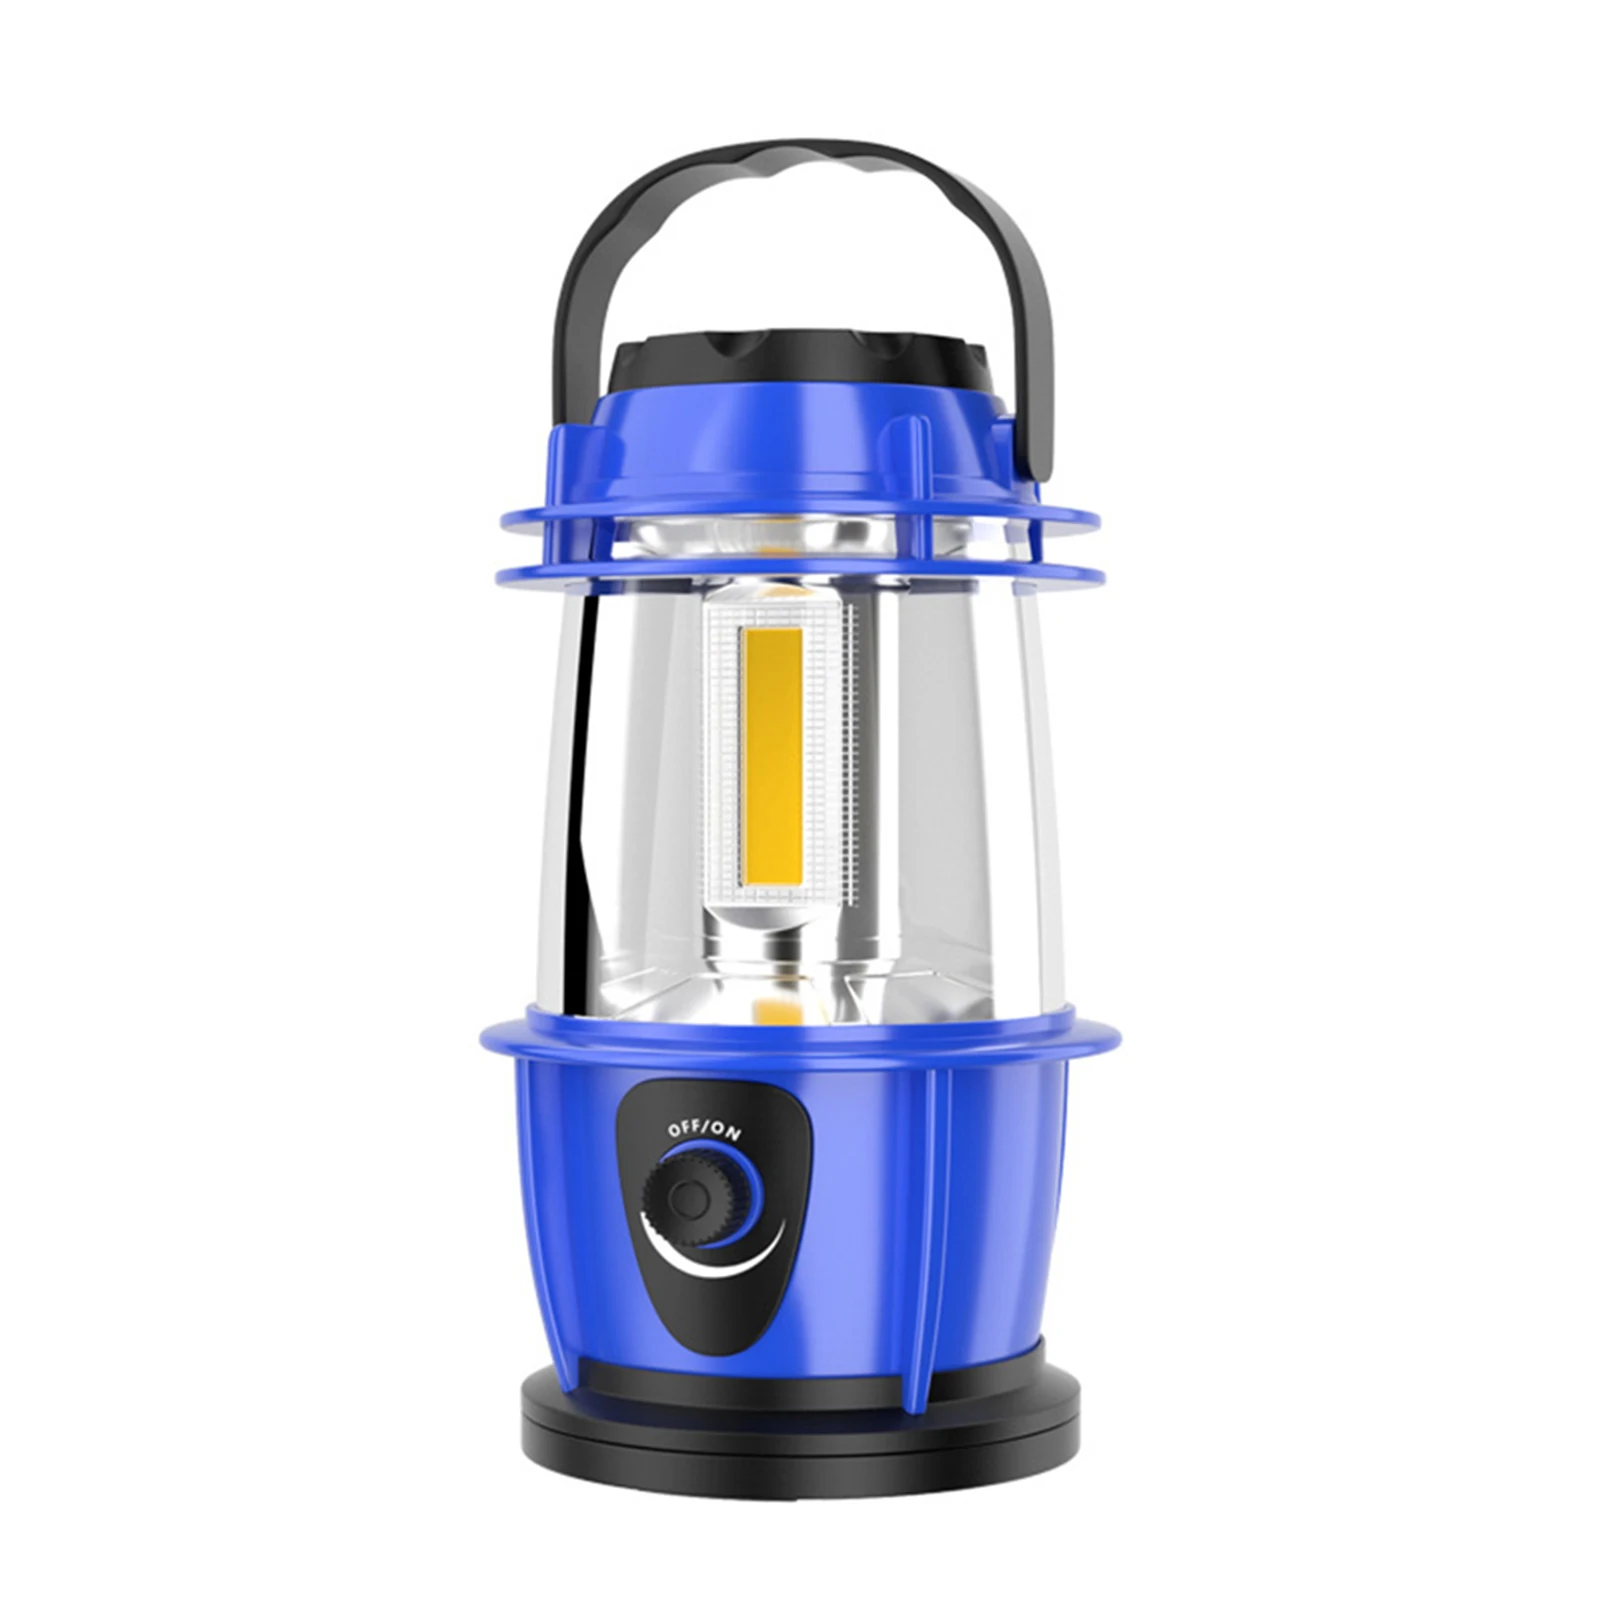 

Mini COB Tent Lamp LED Portable Lantern TelescopicTorch Camping Lamp Waterproof Emergency Light Powered By 3*AA Working Light